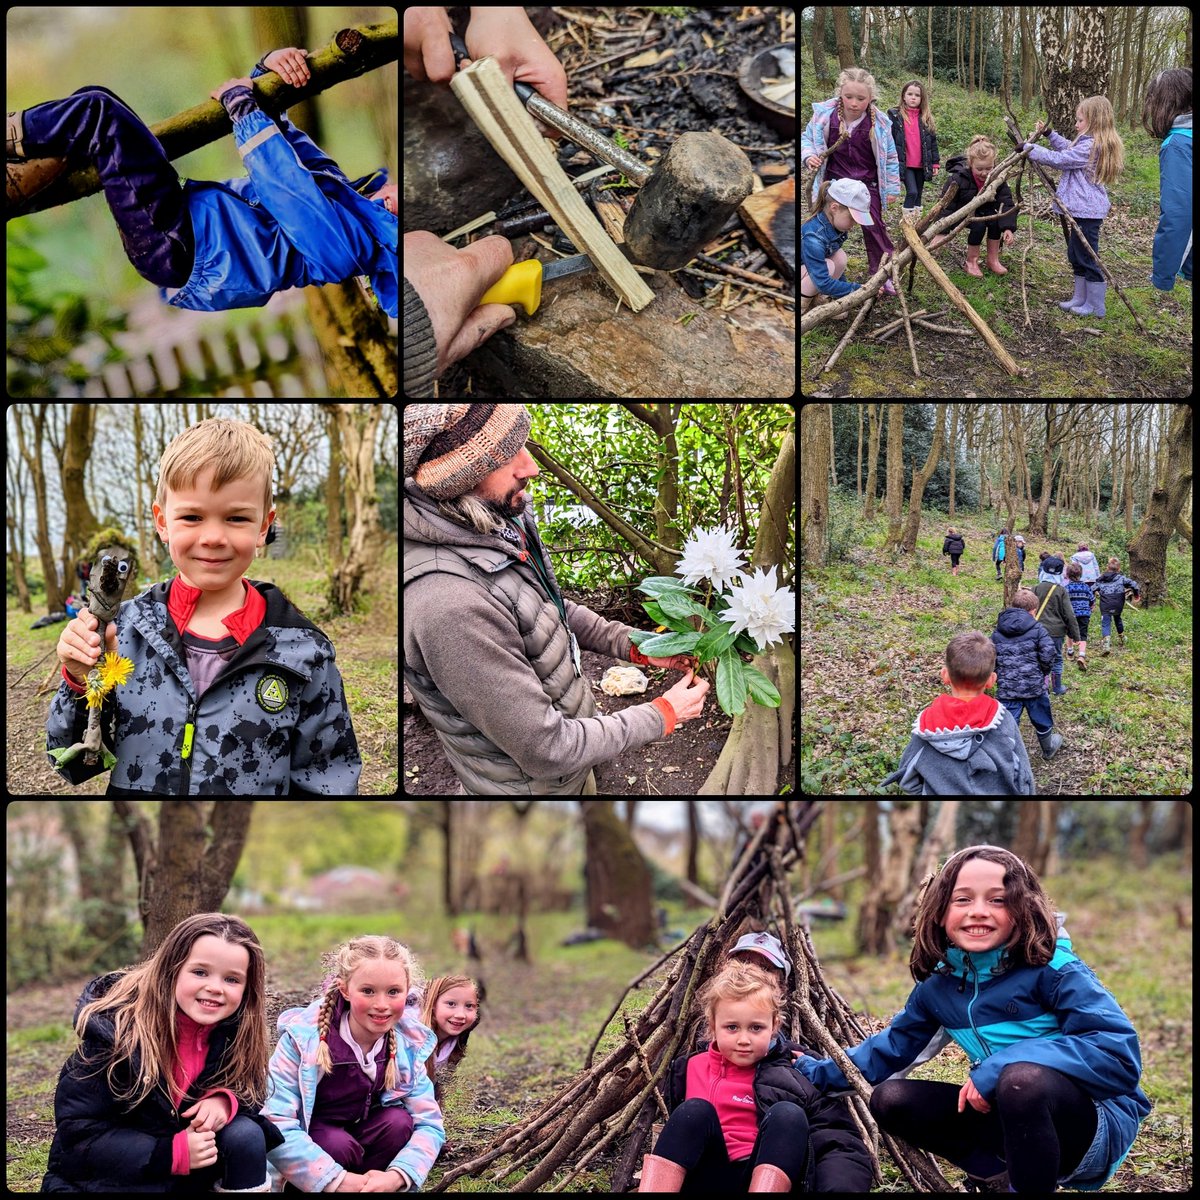 We have been delivering excellence since coming back after a successful Easter holidays! @BfdForestSchls #forestschool #outdoorlearning #nature #leeds #bradford #ilkley